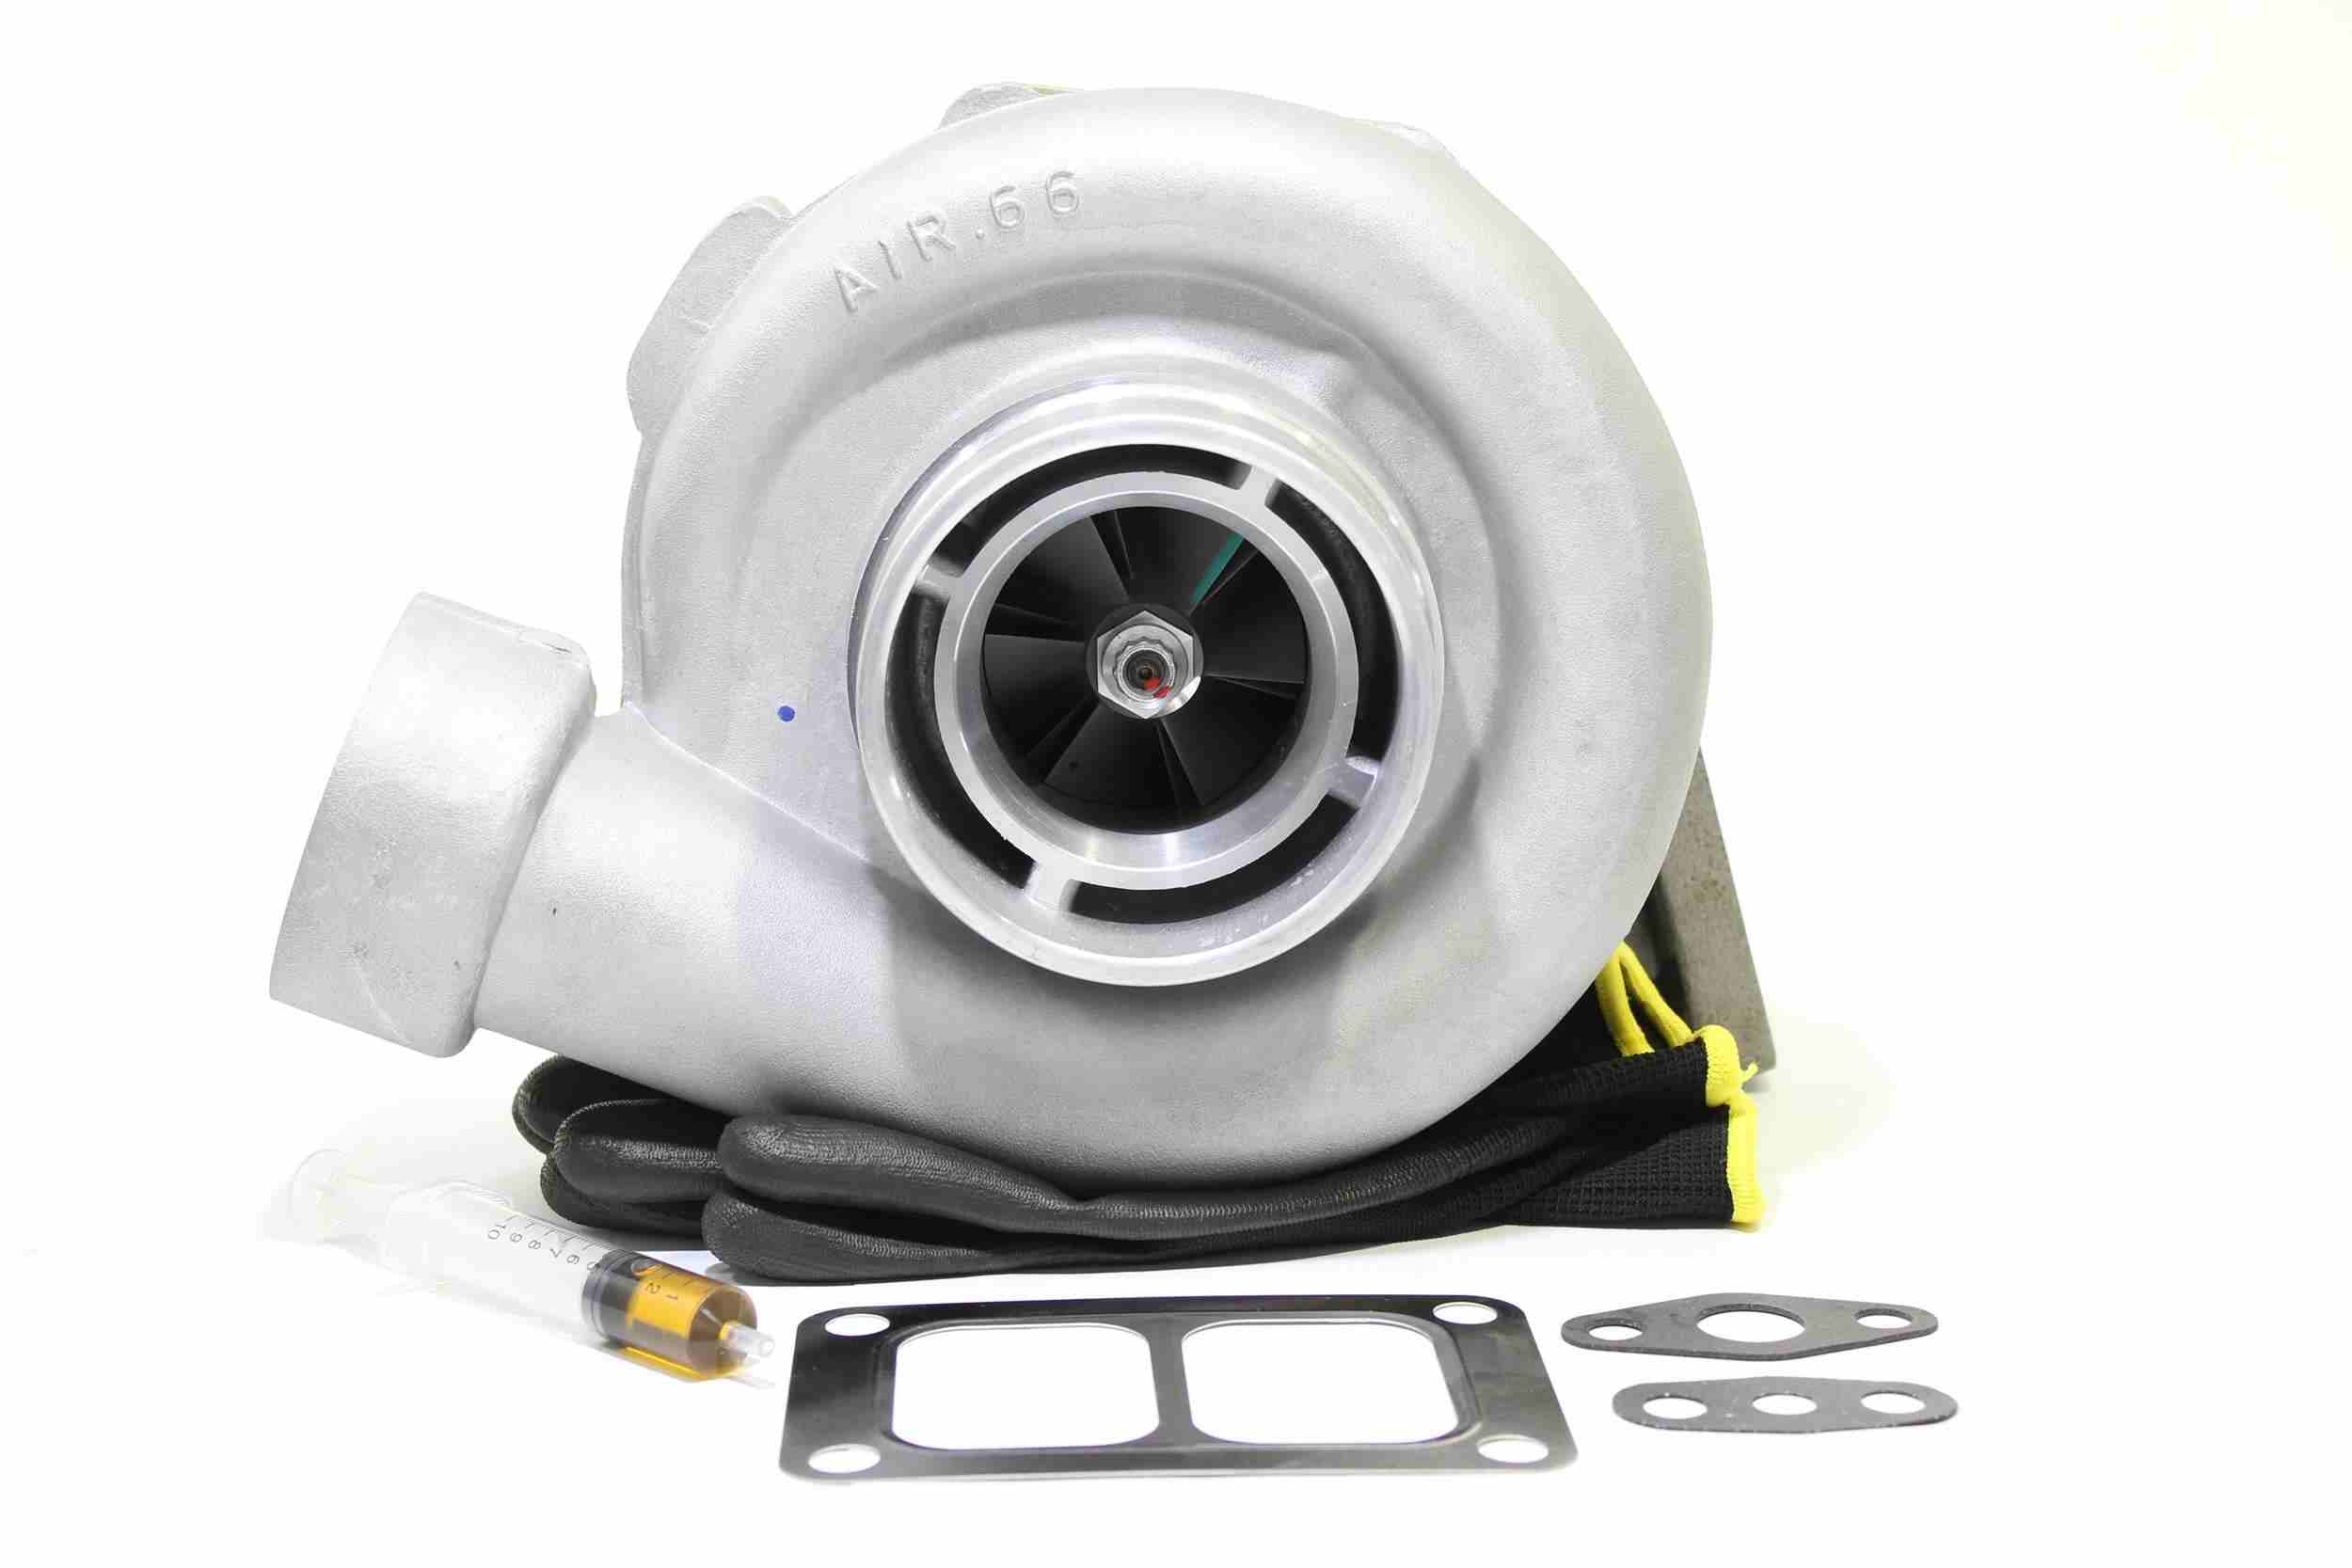 ALANKO 10900374 Turbocharger Exhaust Turbocharger, Incl. Gasket Set, with attachment material